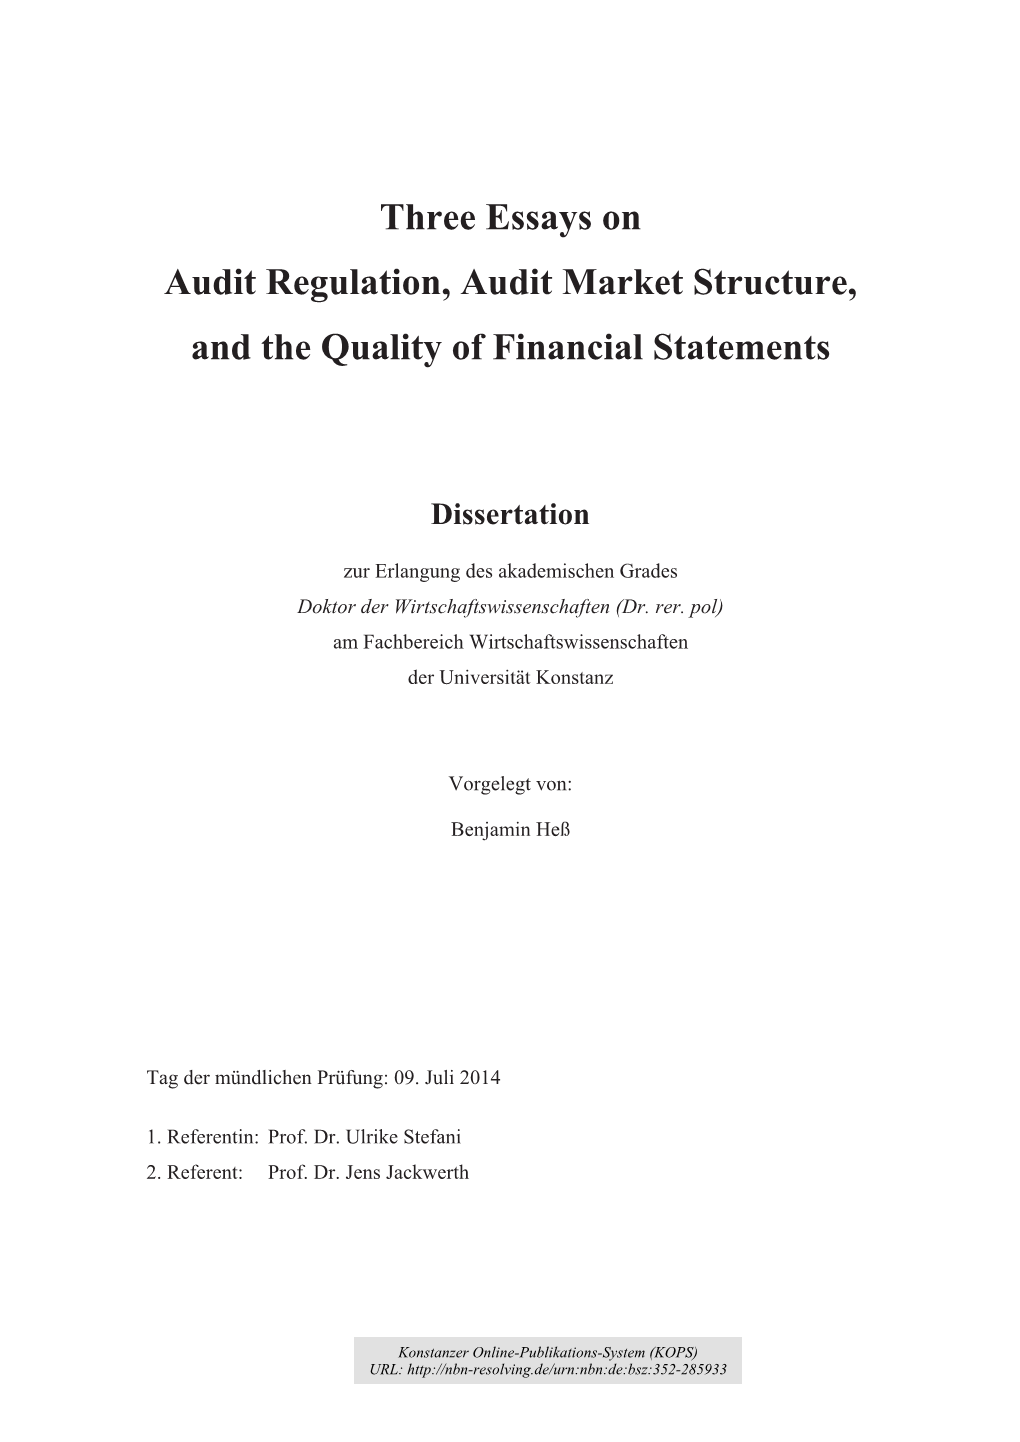 Three Essays on Audit Regulation, Audit Market Structure, and the Quality of Financial Statements